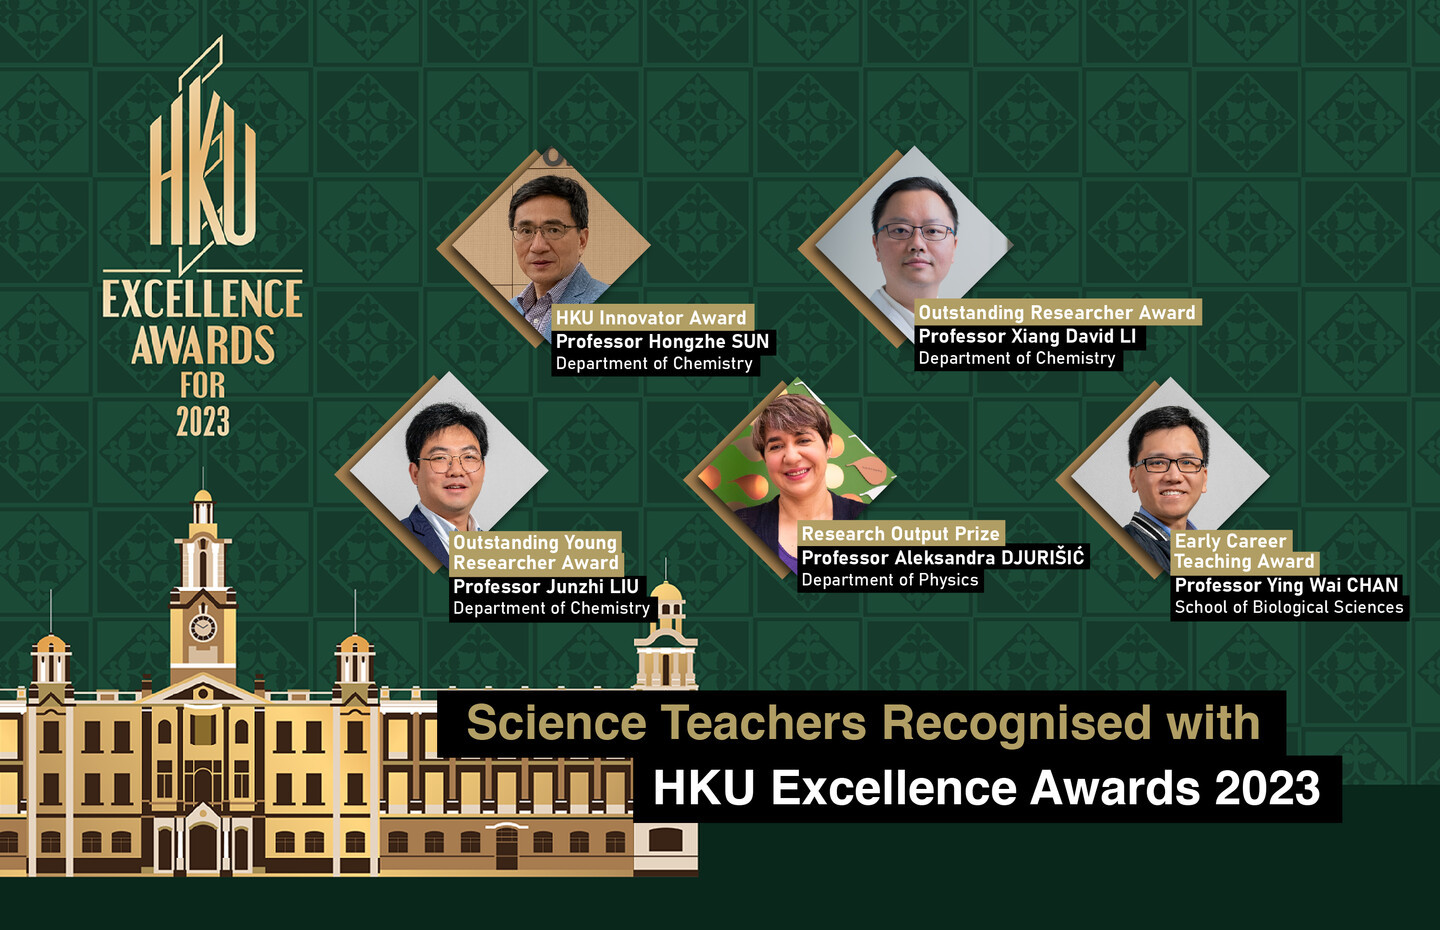 Science Teachers Recognised with HKU Excellence Awards 2023